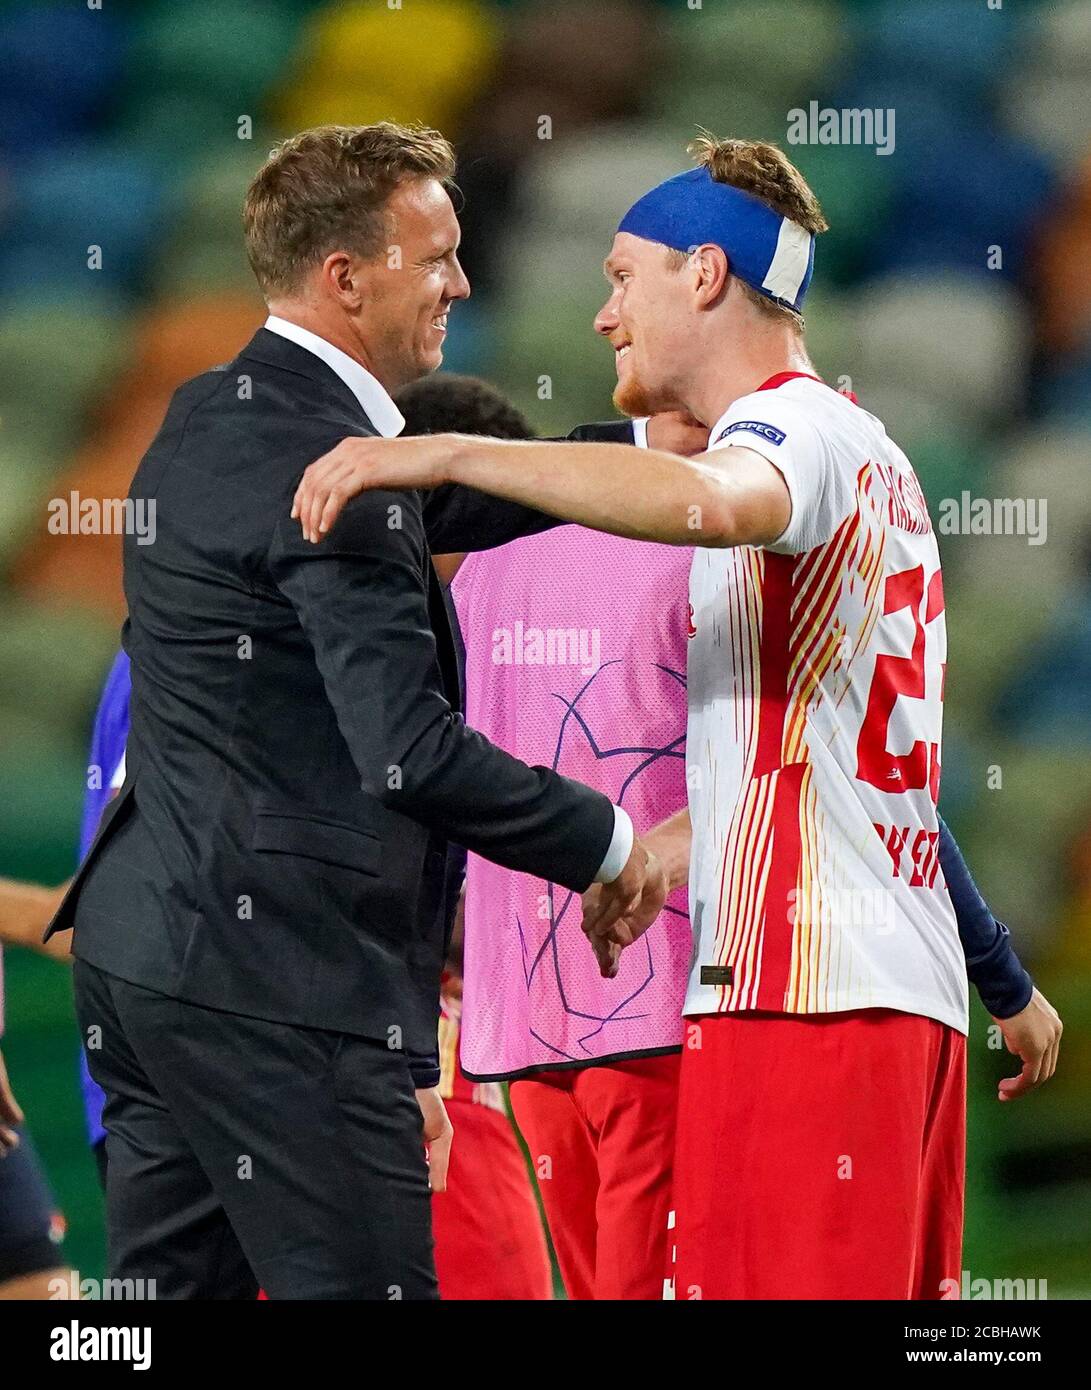 Lisbon, Portugal, 13th August 2020,  Schlussjubel: Trainer Julian Nagelsmann (RBL) und Marcel Halstenberg (RBL) in the quarterfinal UEFA Champions League match final tournament RB LEIPZIG - ATLETICO MADRID  in Season 2019/2020.  © Peter Schatz / Alamy Live News /Pool   - UEFA REGULATIONS PROHIBIT ANY USE OF PHOTOGRAPHS as IMAGE SEQUENCES and/or QUASI-VIDEO -  National and international News-Agencies OUT Editorial Use ONLY Stock Photo